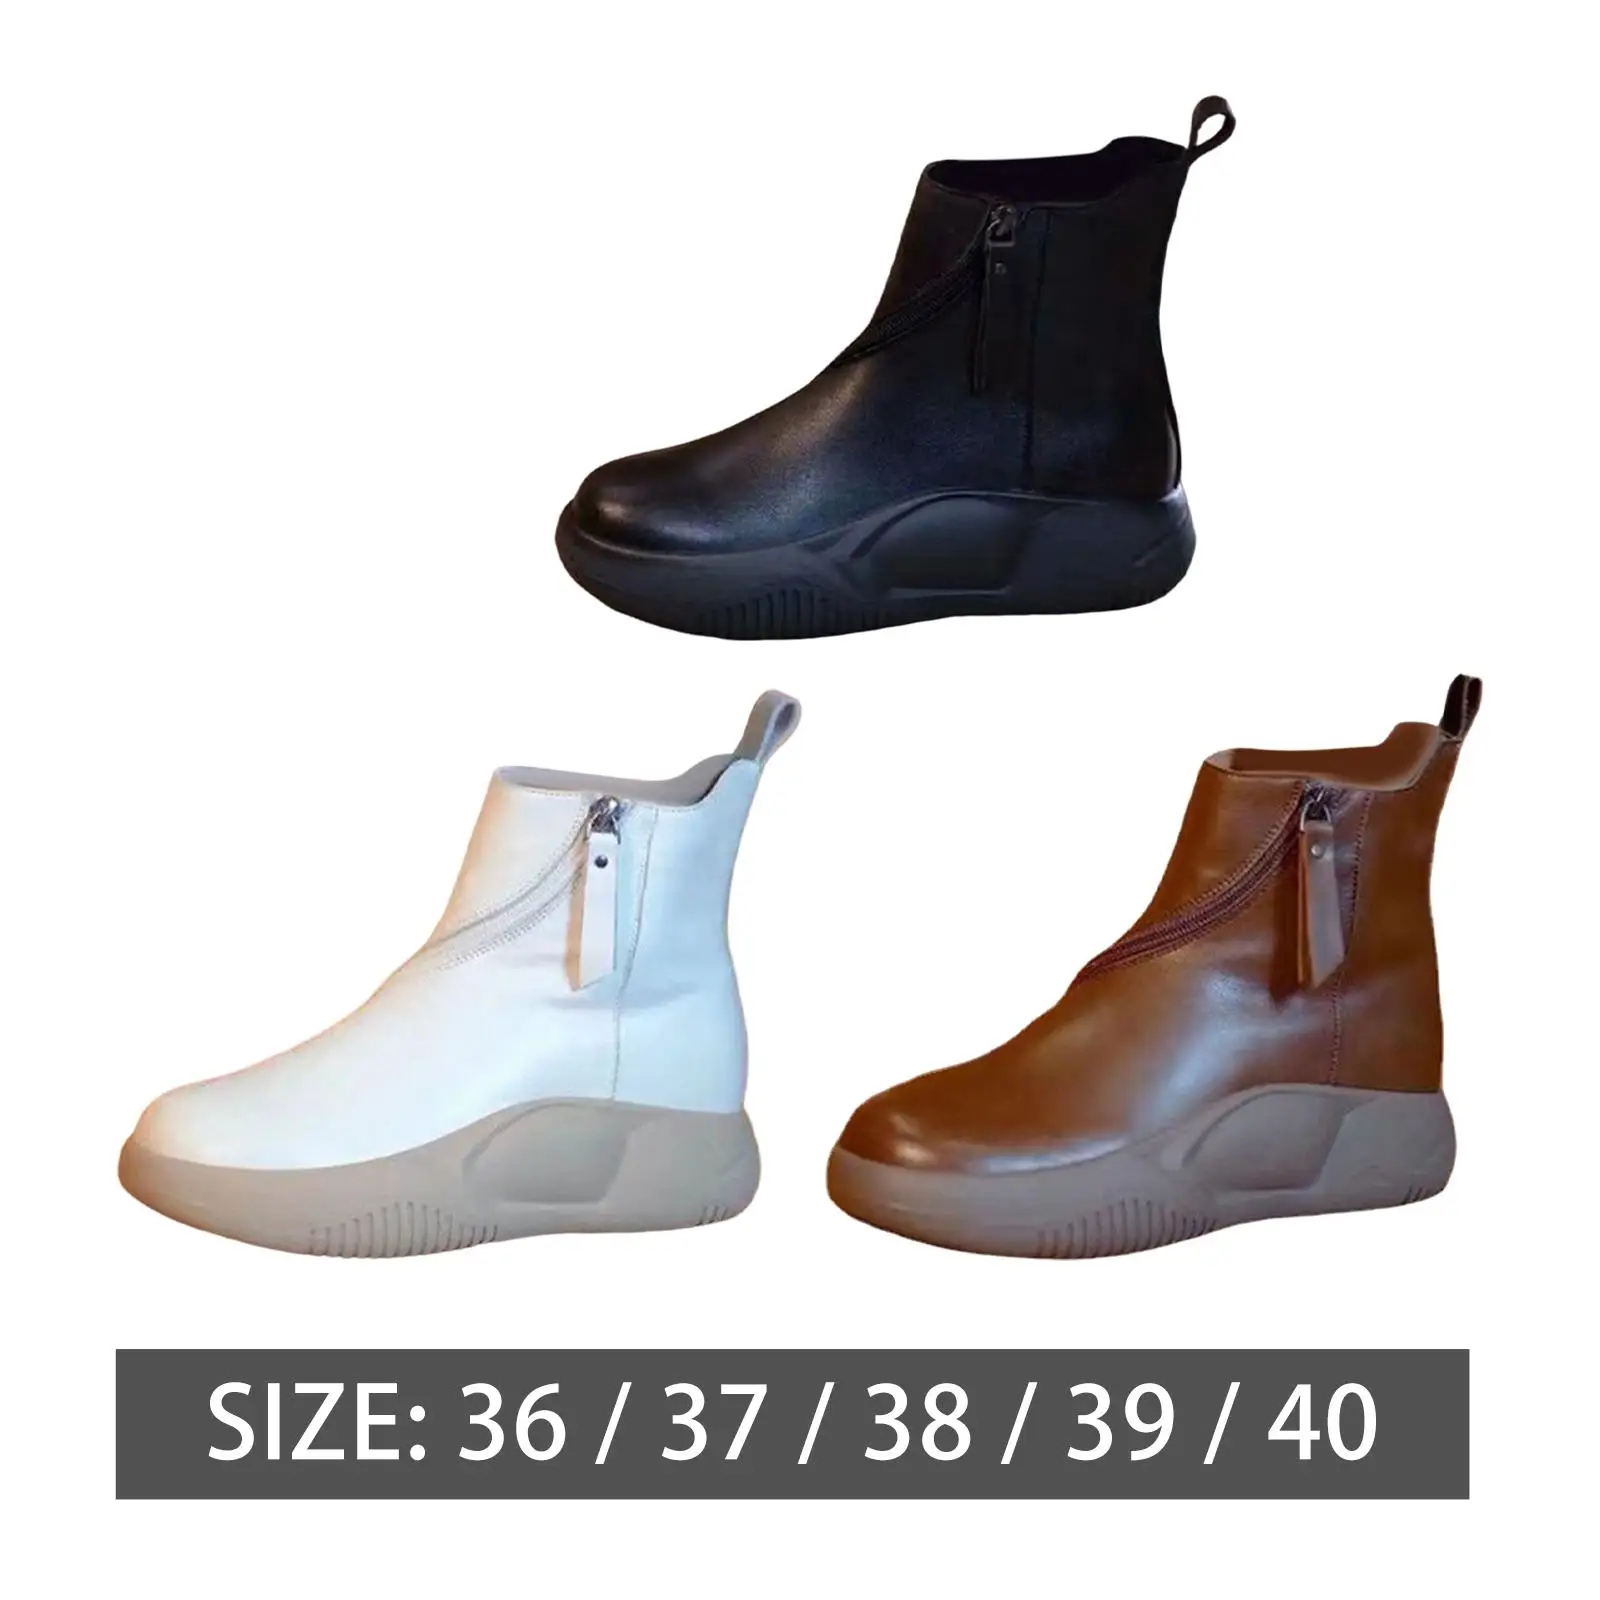 Fashion Autumn Short Boots with Zipper Ankle Boots Women Boots for Ladies Birthday Gifts